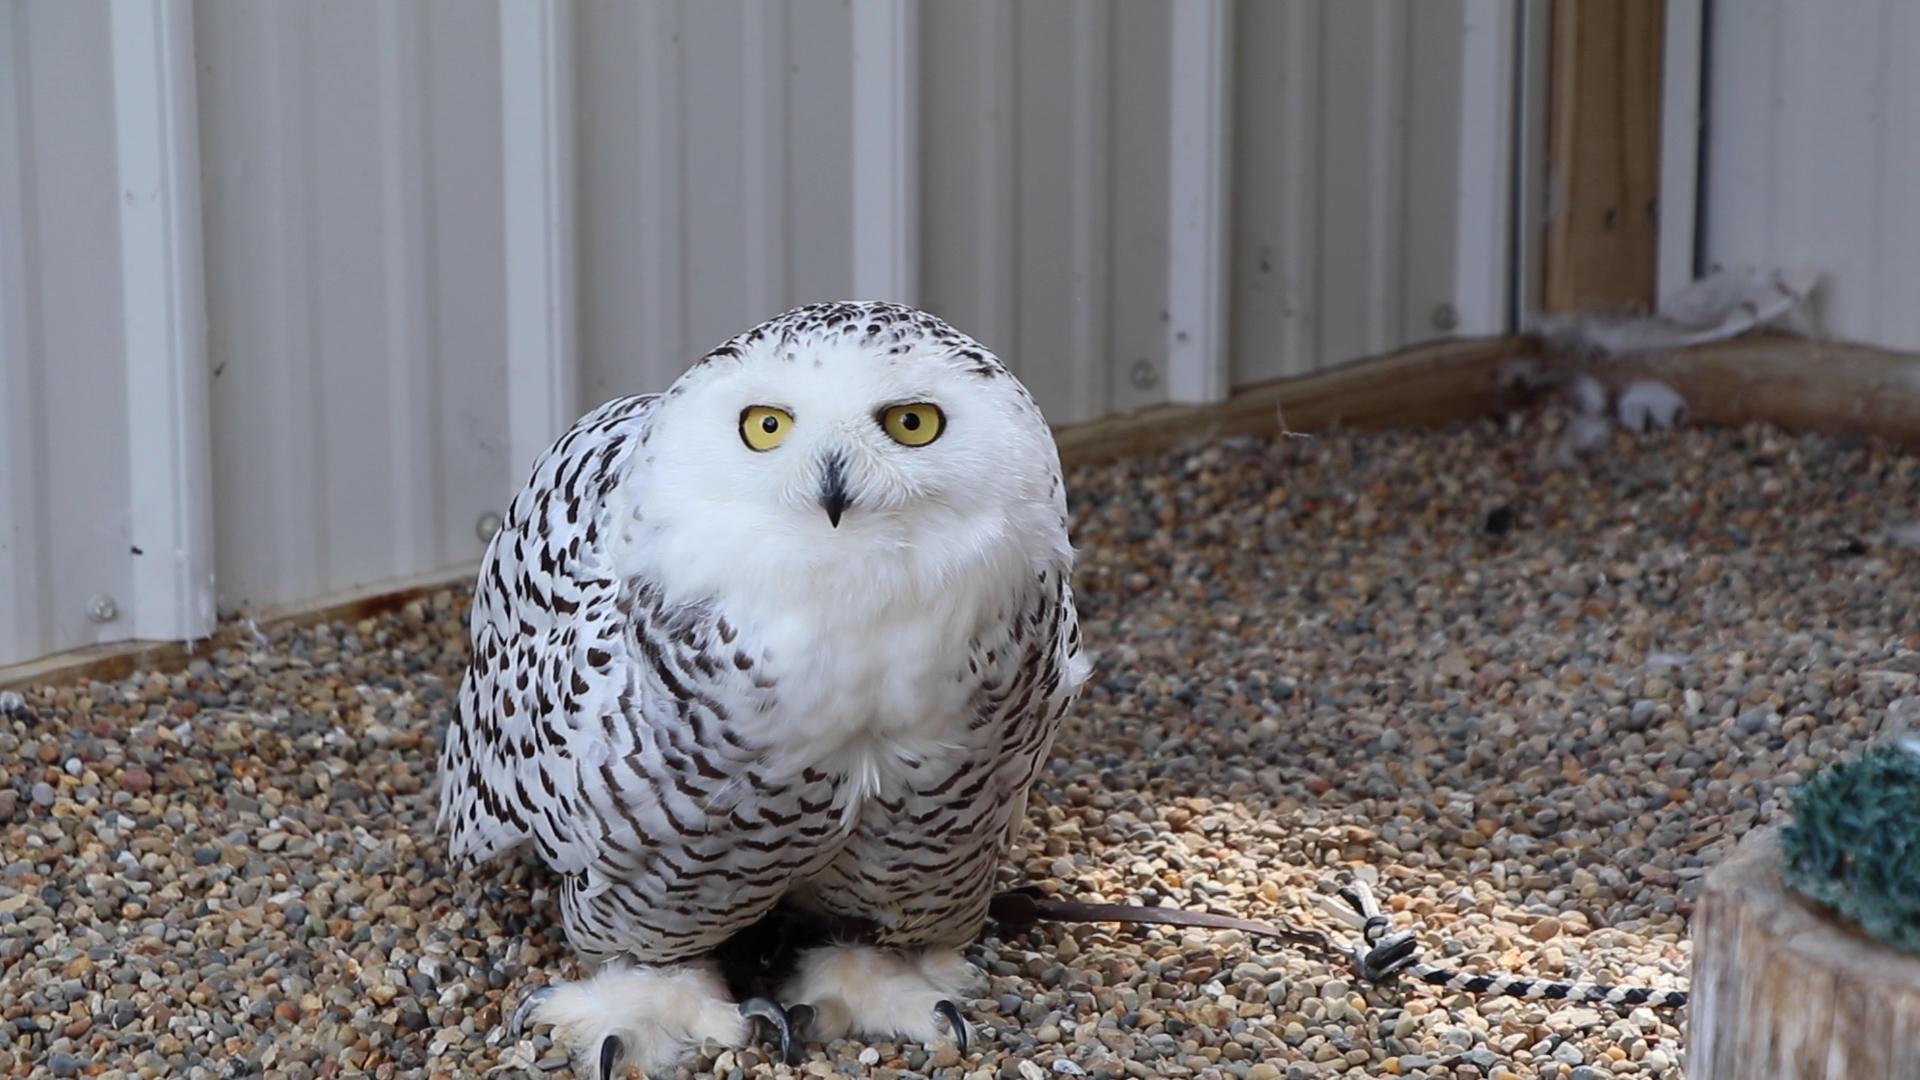 This snowy owl was bred in captivity in Canada and brought to the Illinois Raptor Center as a permanent resident. Unlike most owls, which are nocturnal, the snowy owl is active during the day. (Evan Garcia / WTTW News)